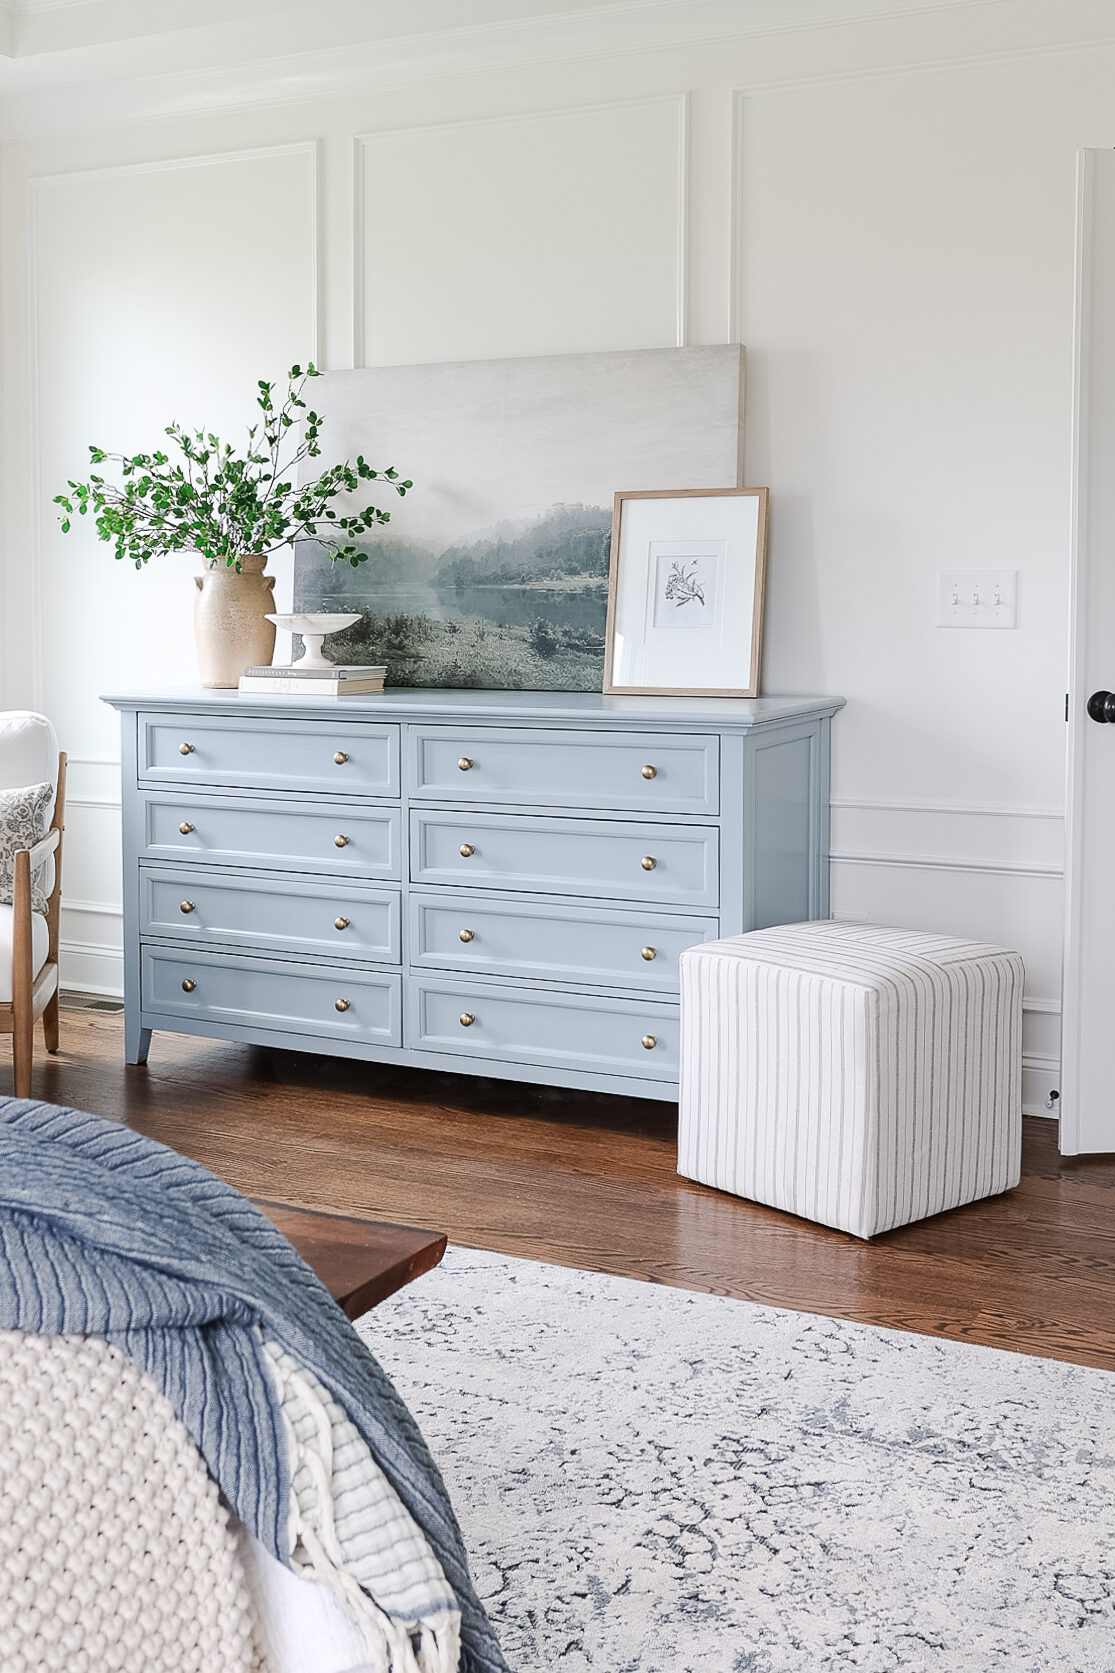 sherwin williams stardew blue dresser in bedroom with art and vase of greenery